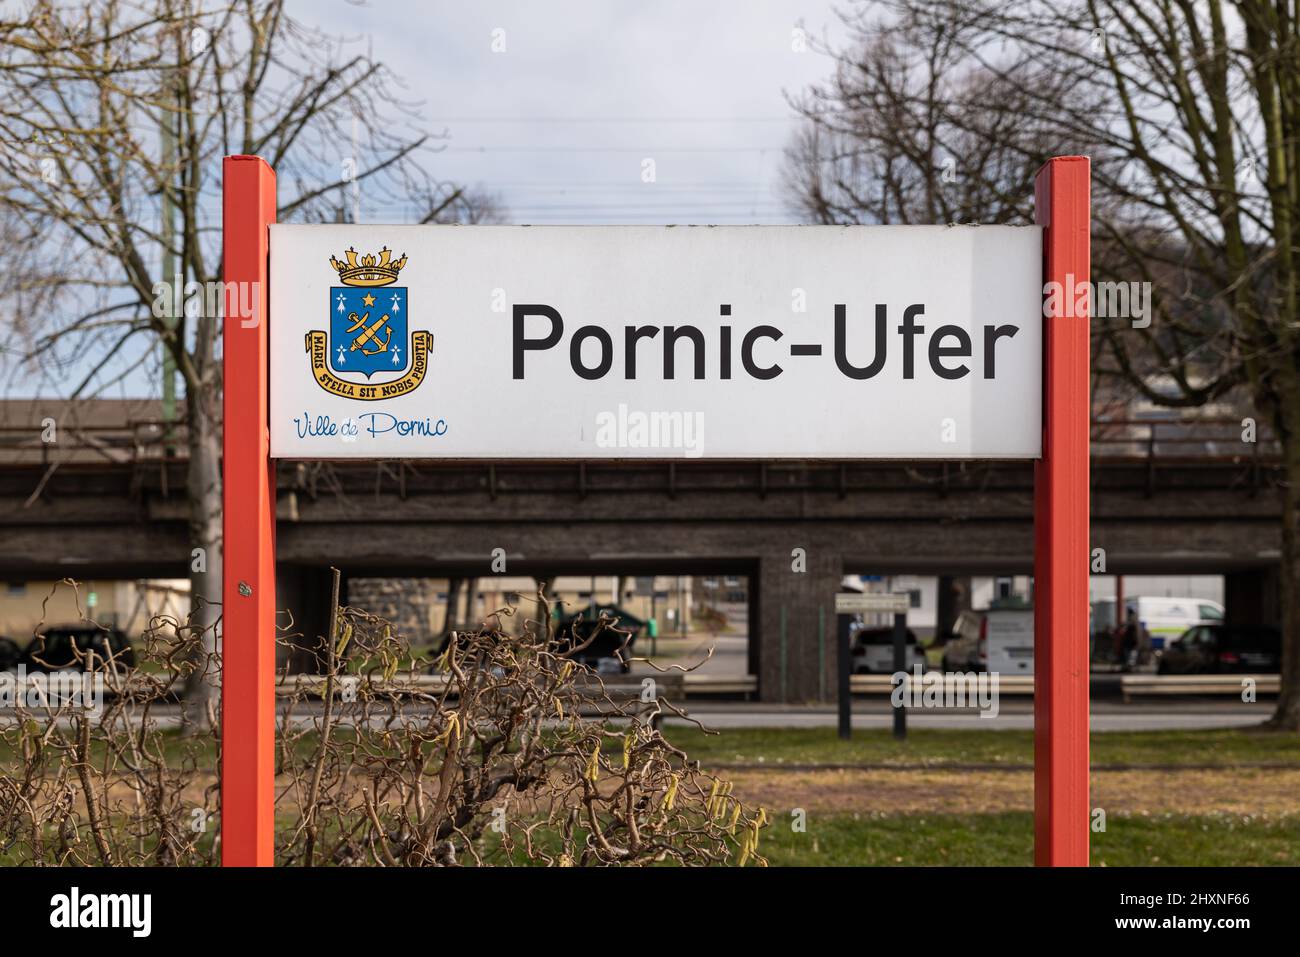 Linz am Rhein, Germany - 2022-03-12: Pornic-Ufer, a park next to River Rhine, referring to   Linz' town twinning with the French city of Pornic Stock Photo